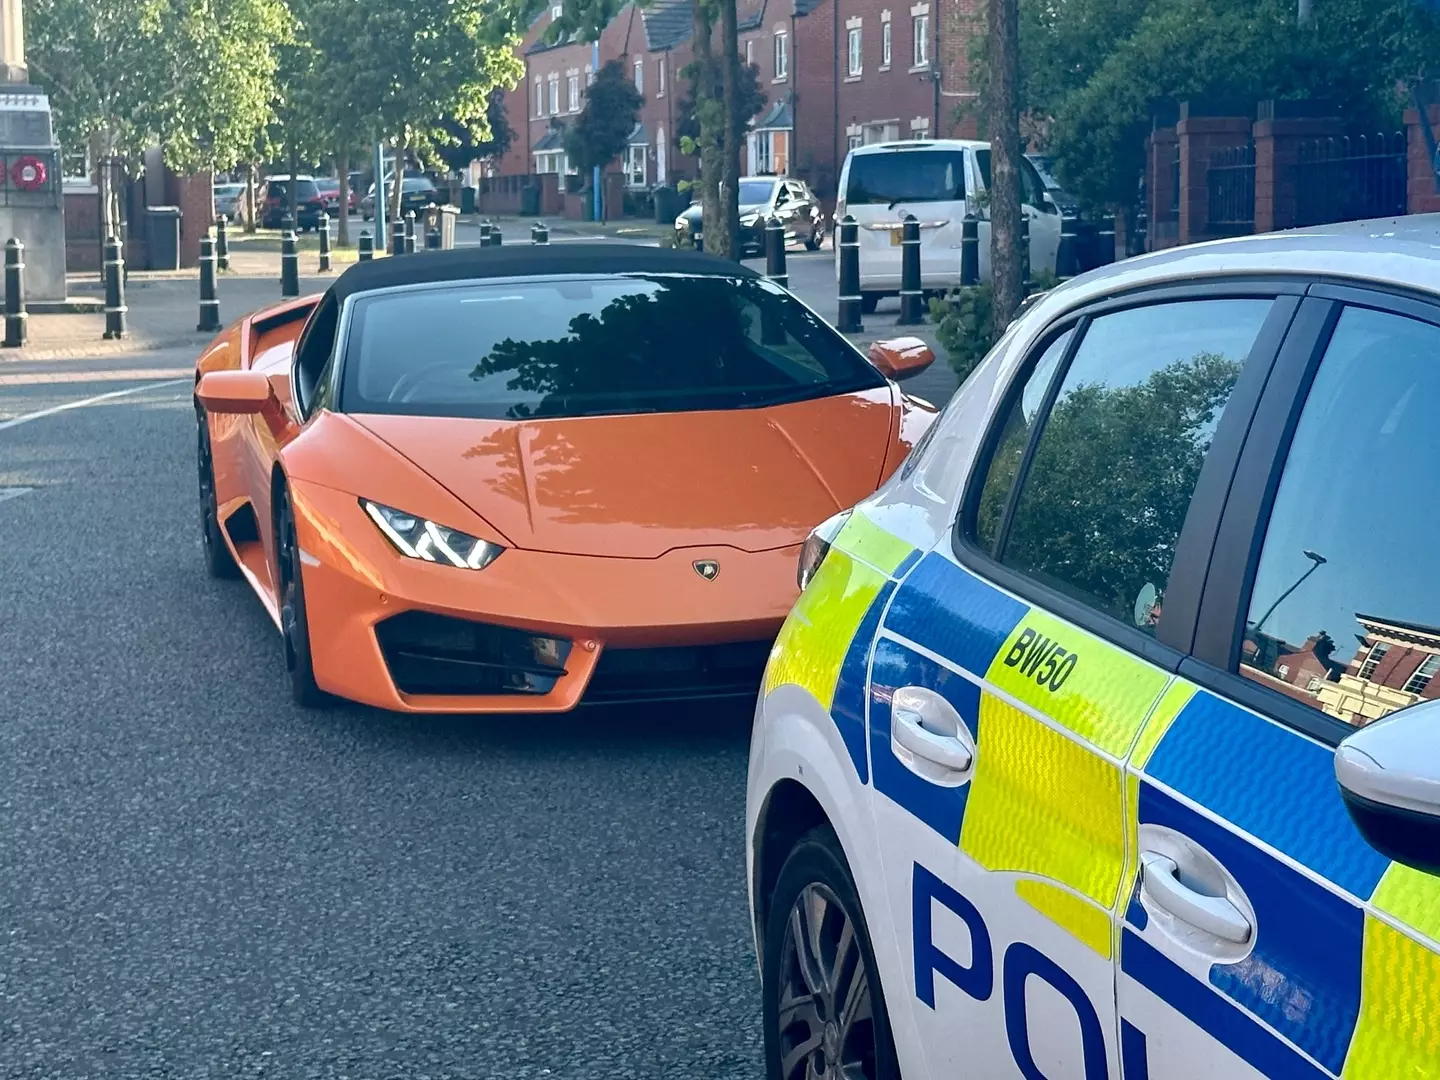 Police pulled over the driver of this Lamborghini Huracan Spyder after discovering it had no road tax.